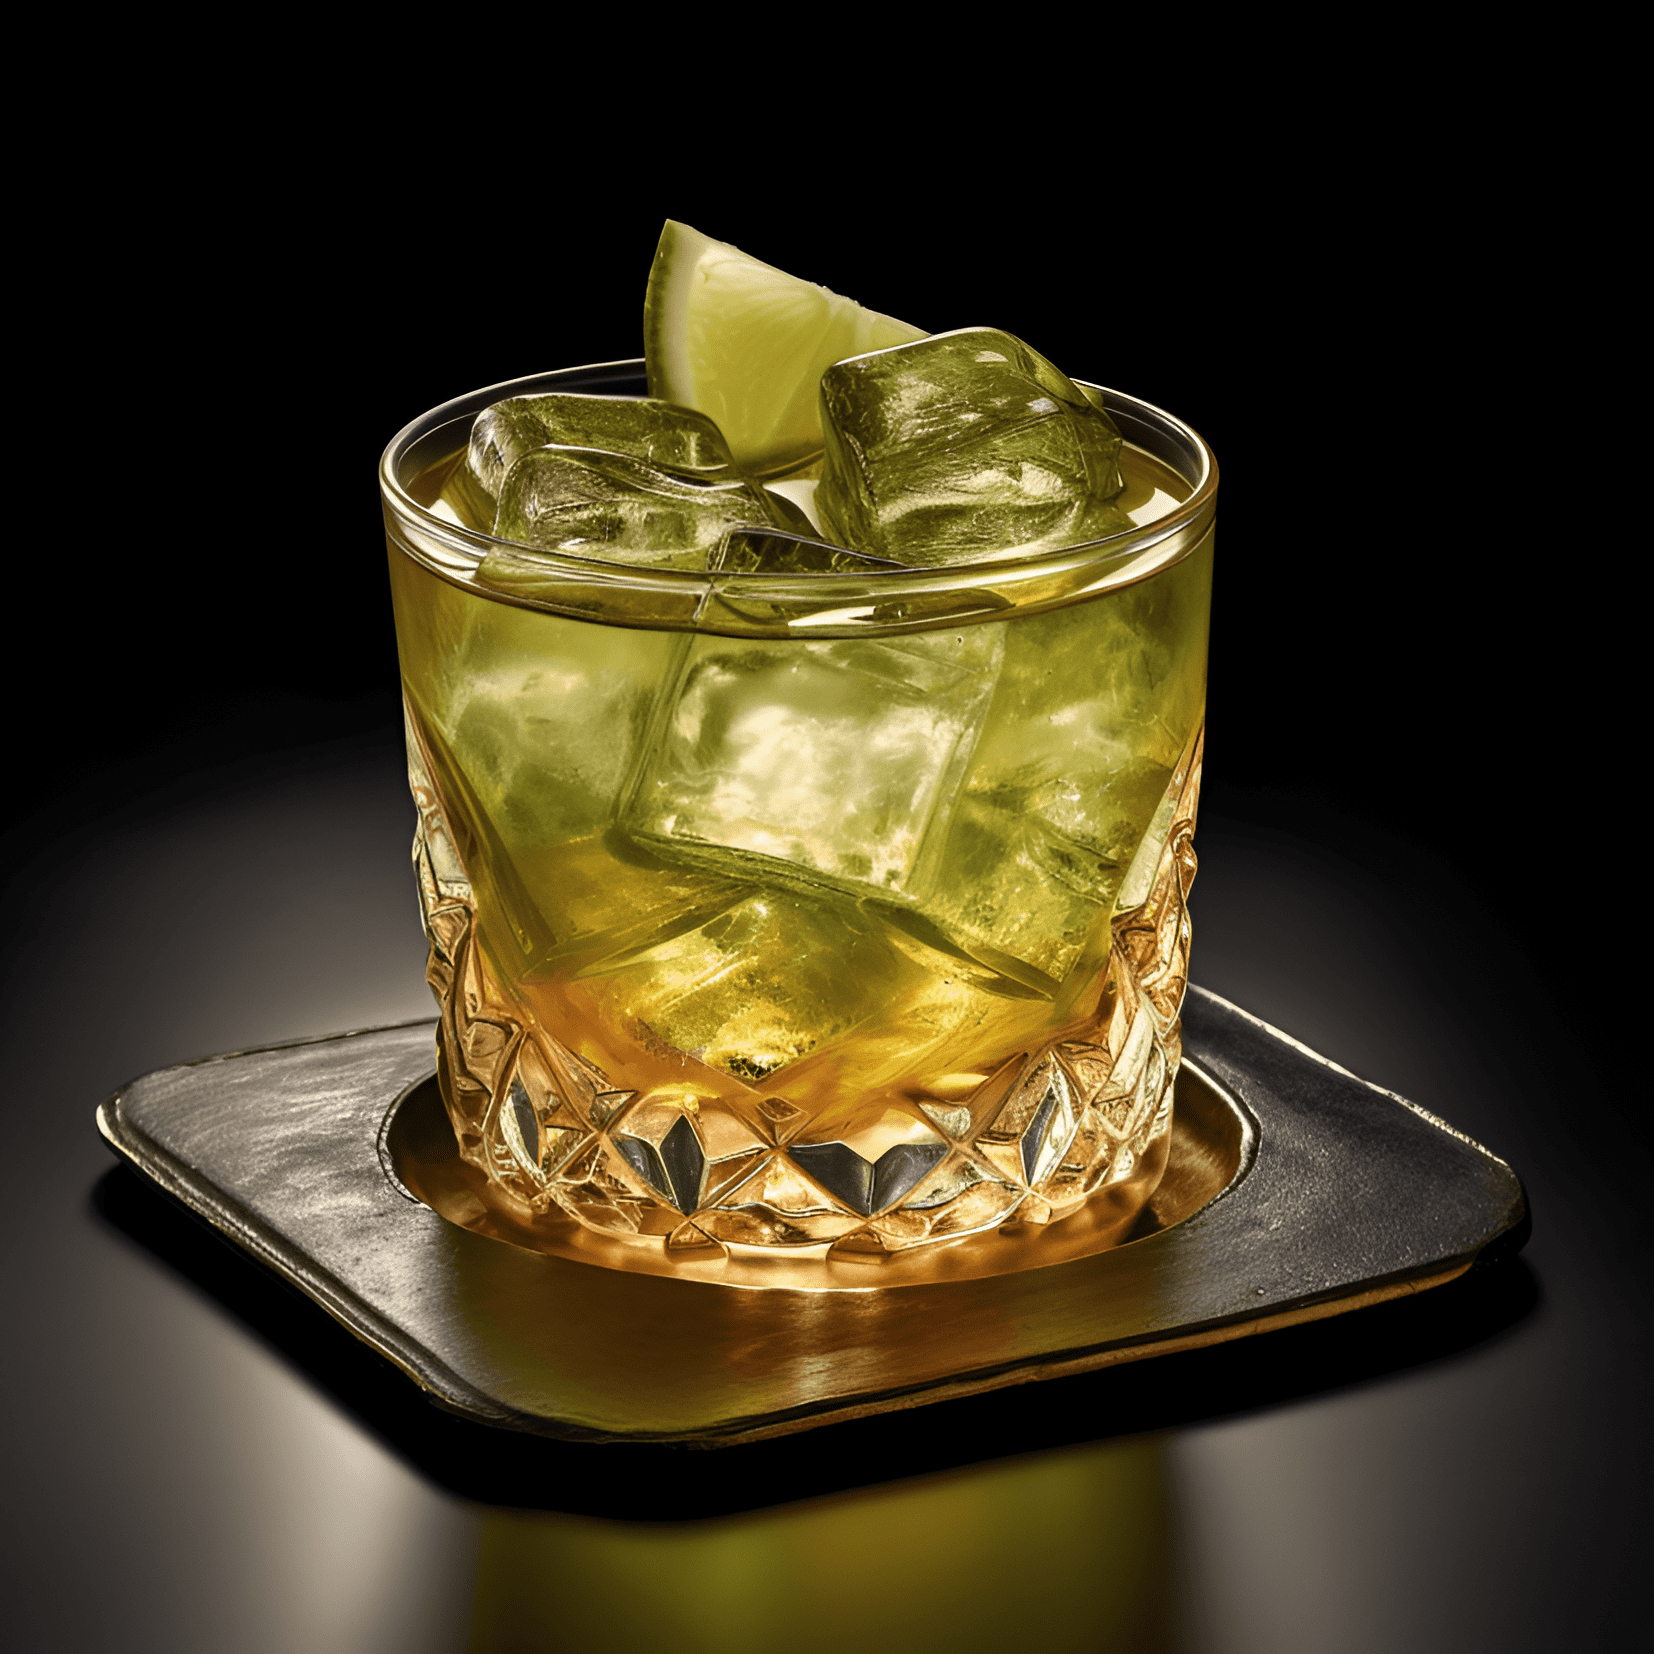 The Mariner cocktail is a well-balanced and refreshing drink with a slightly sweet and tangy flavor profile. It has a smooth, velvety texture and a pleasant citrus aroma. The combination of rum, lime juice, and simple syrup creates a harmonious blend of flavors that is both invigorating and soothing.